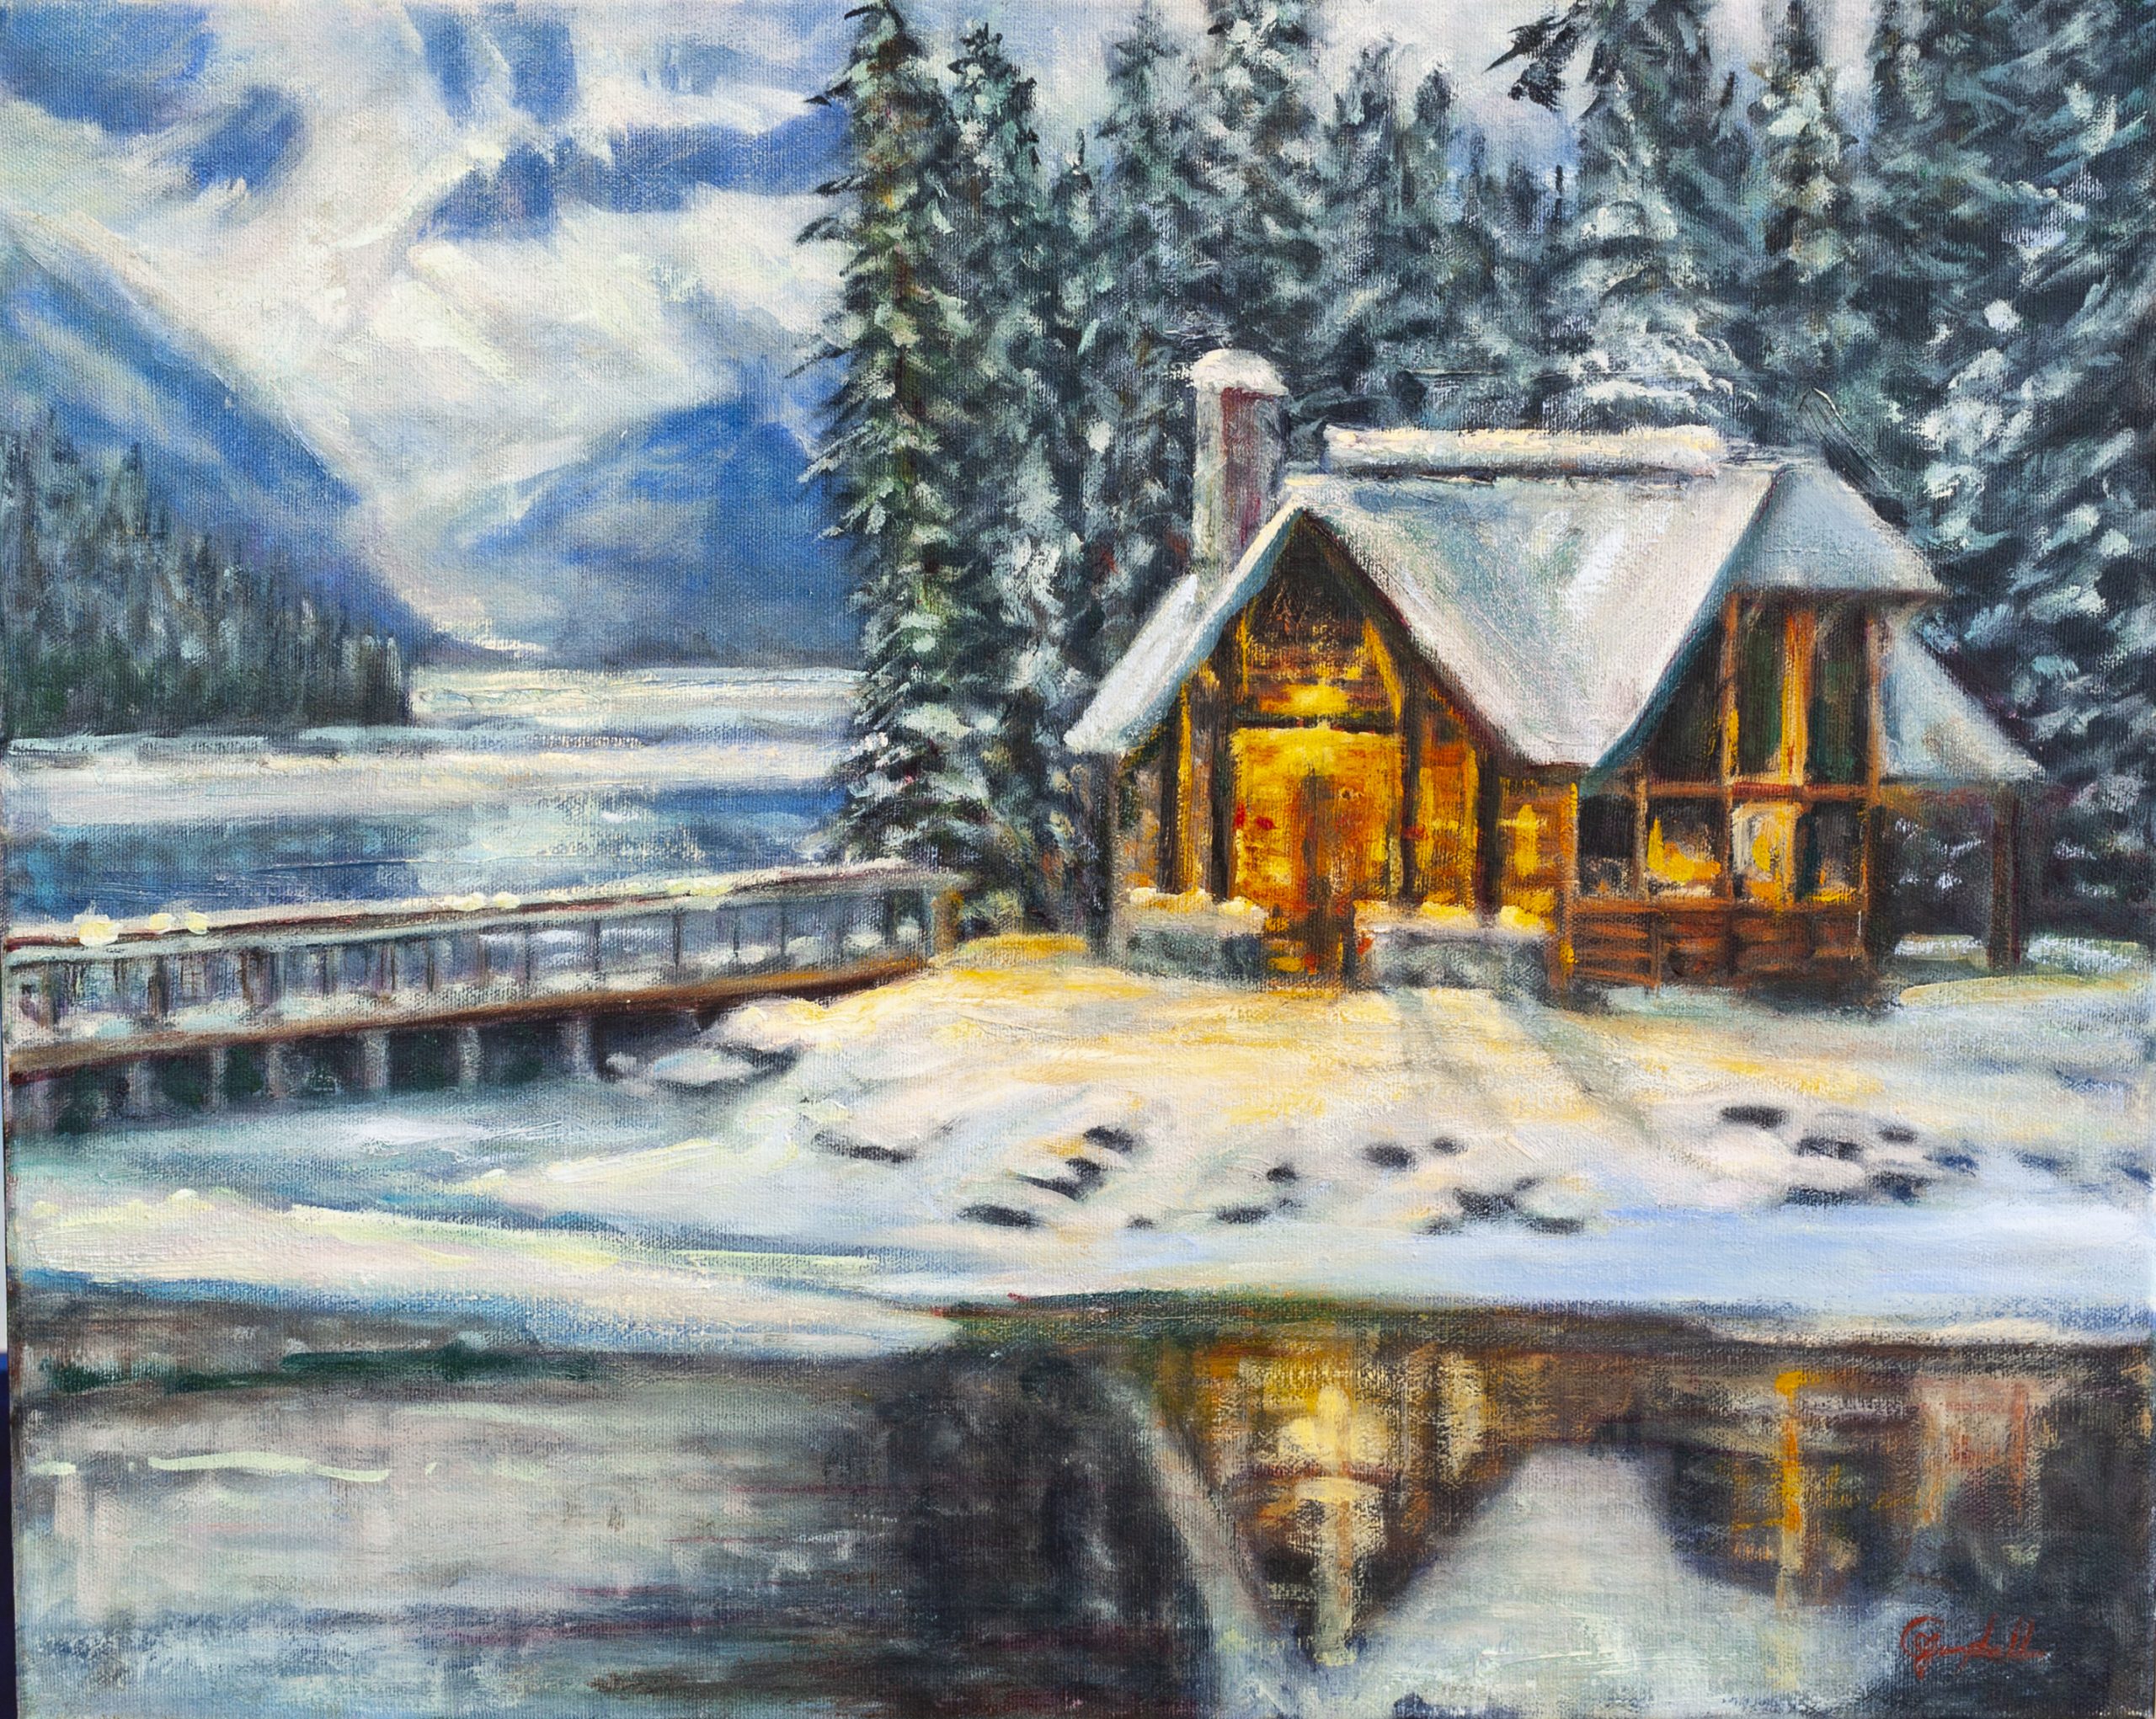 Cabin Light at Emerald 20x16 Oil on canvas by CJ Campbell